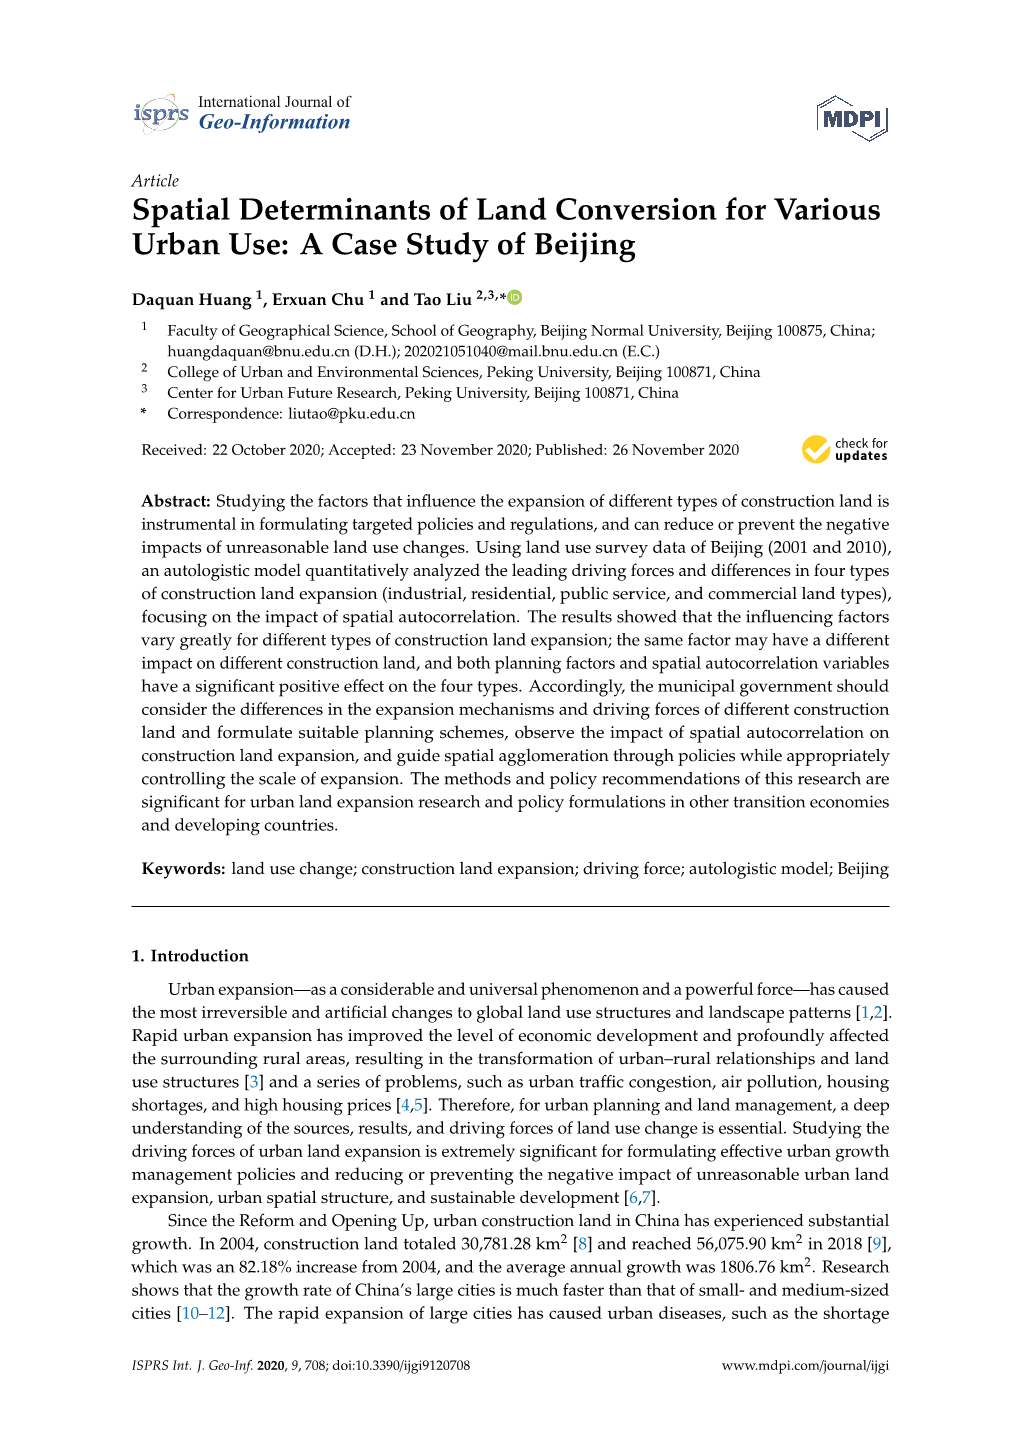 Spatial Determinants of Land Conversion for Various Urban Use: a Case Study of Beijing